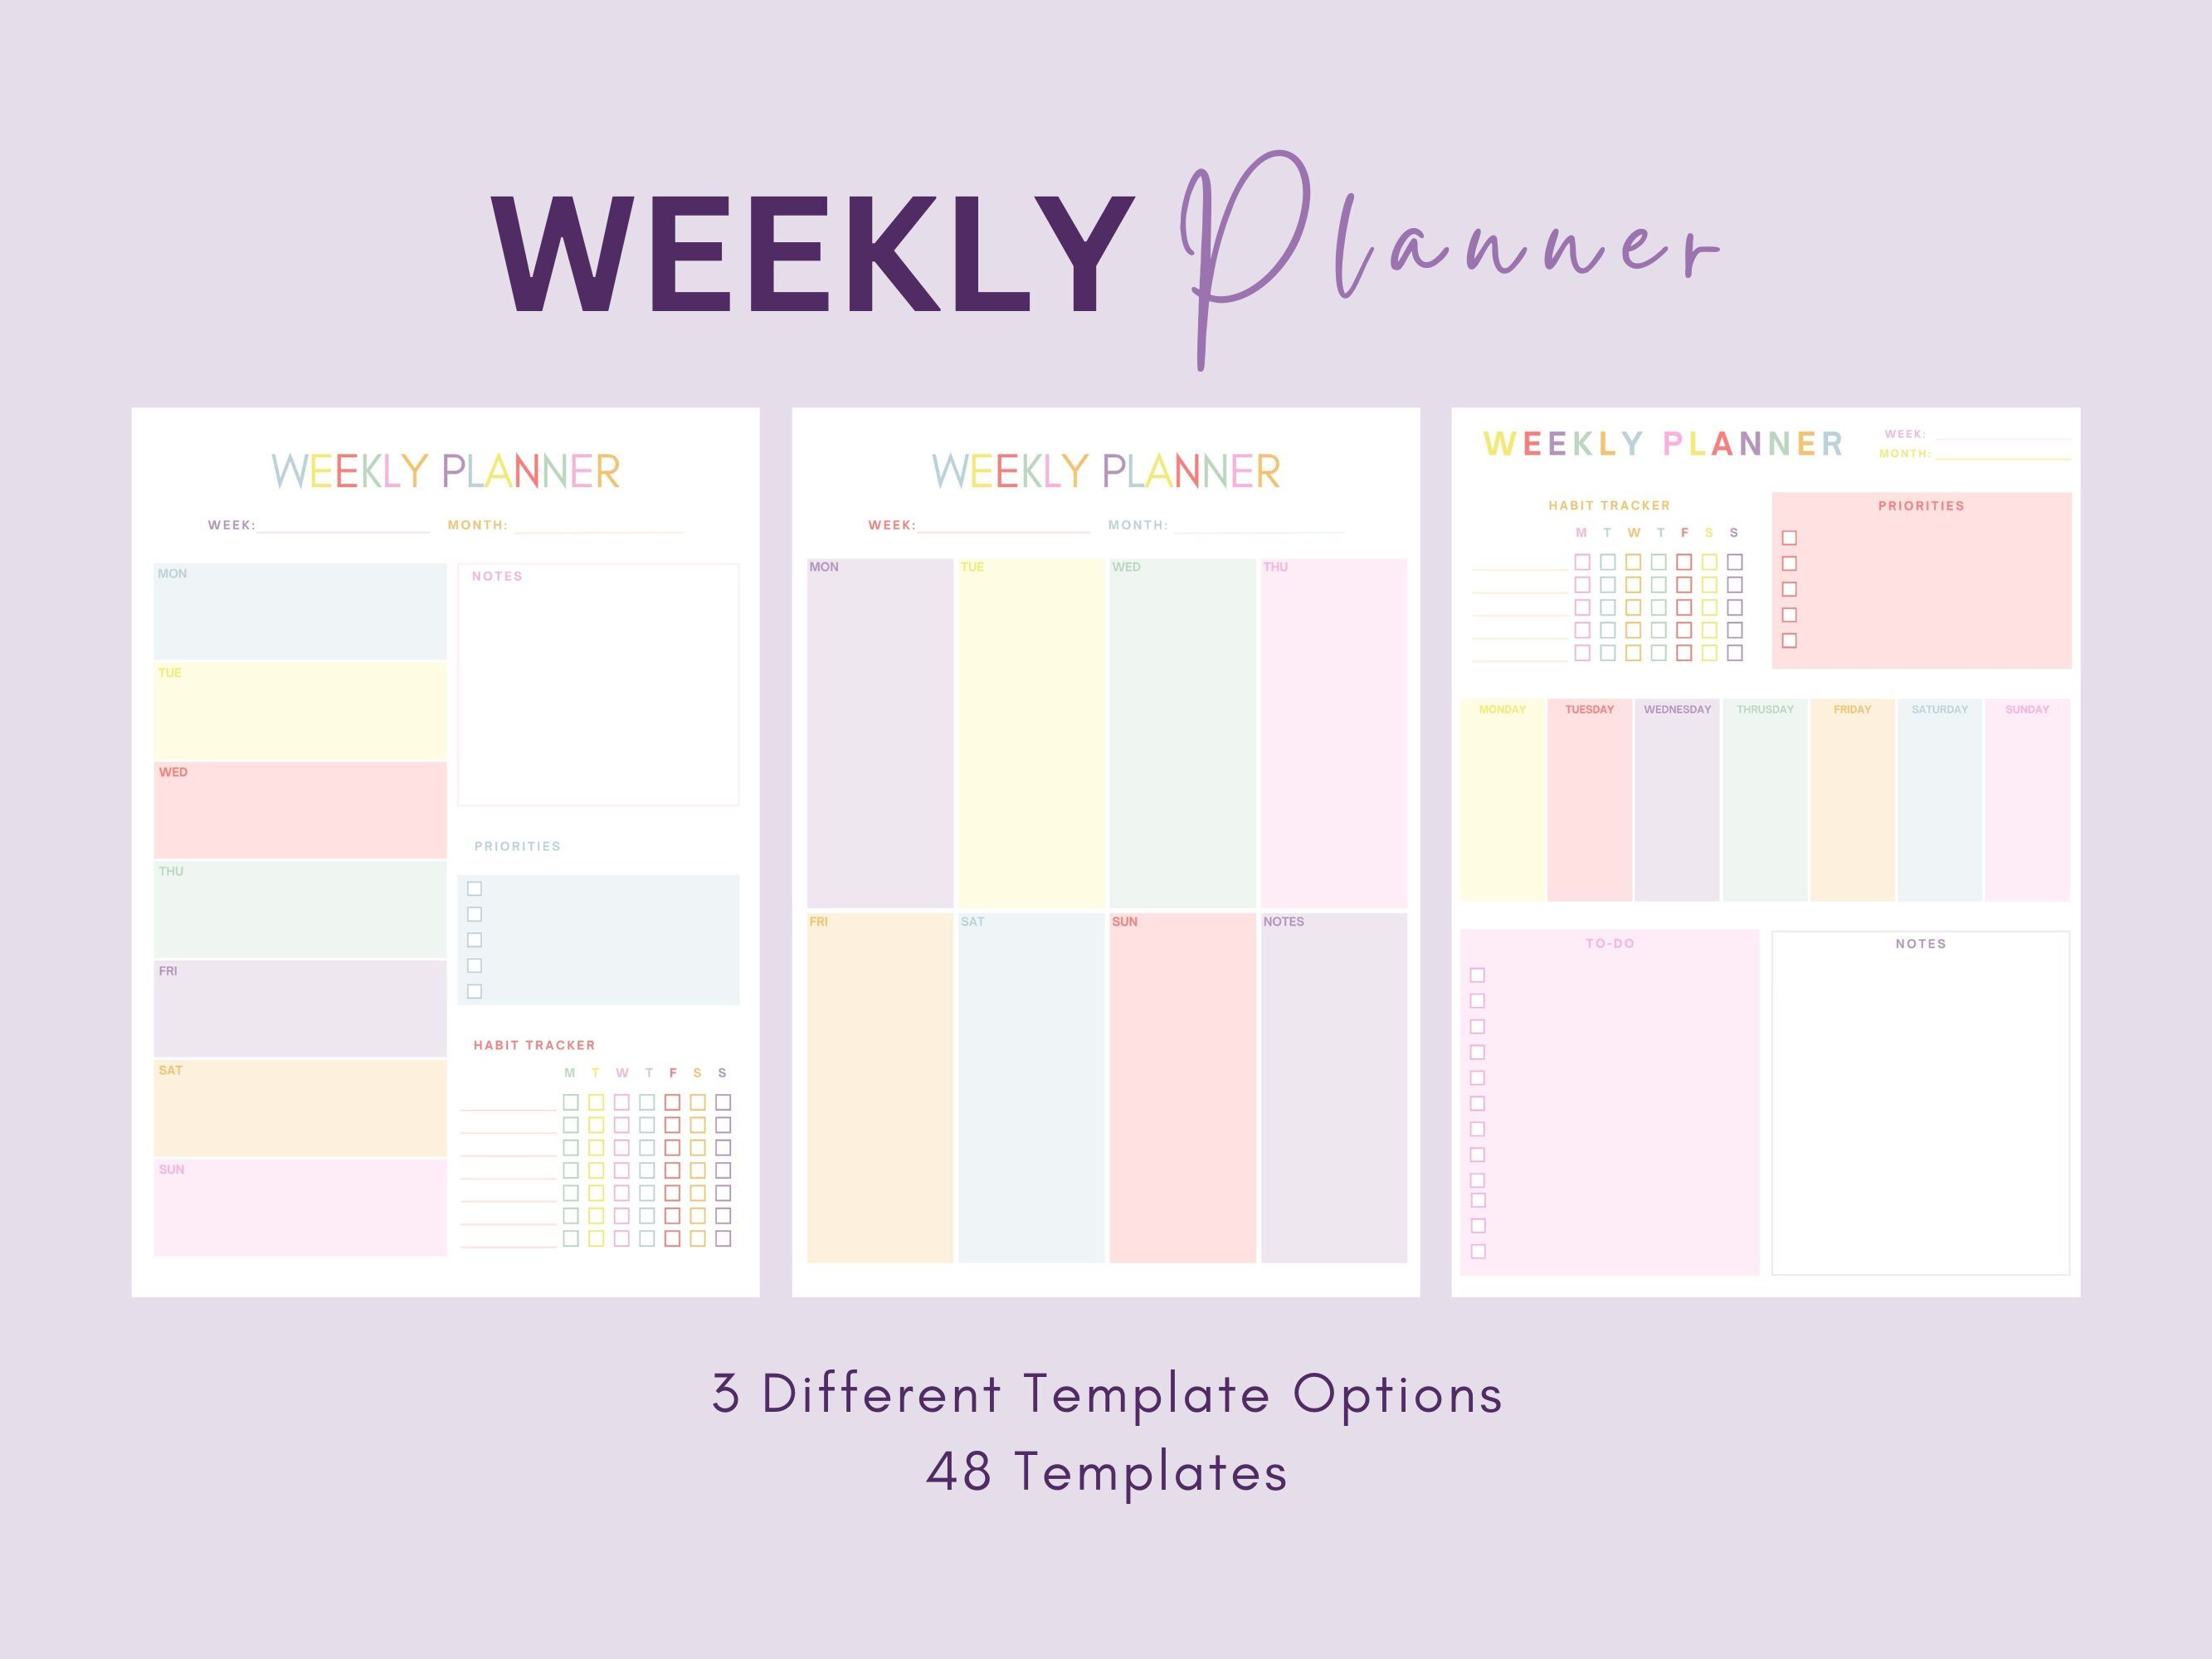 Coloring Planner, Printable Planner, Undated Planner, Monthly